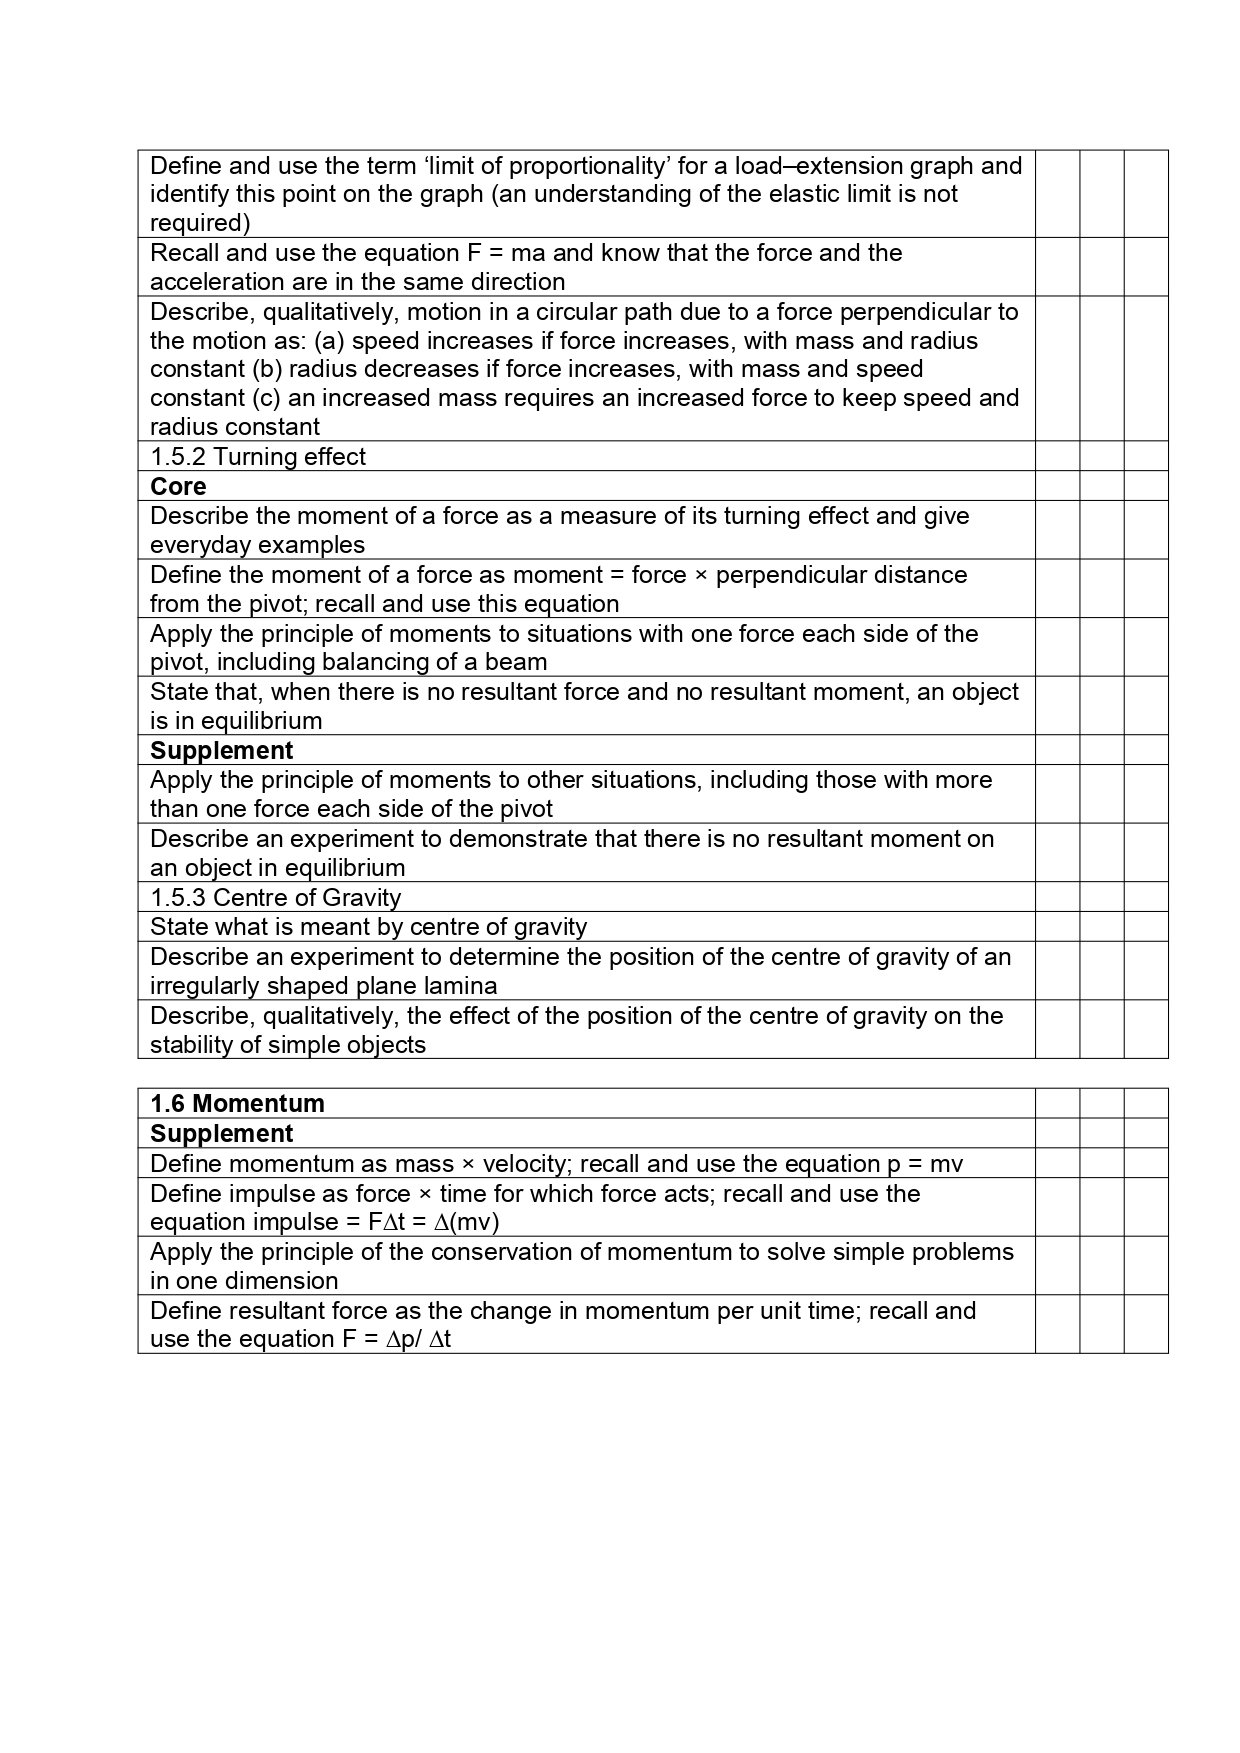 Forces and Motion Checklist_page-0003.jpg